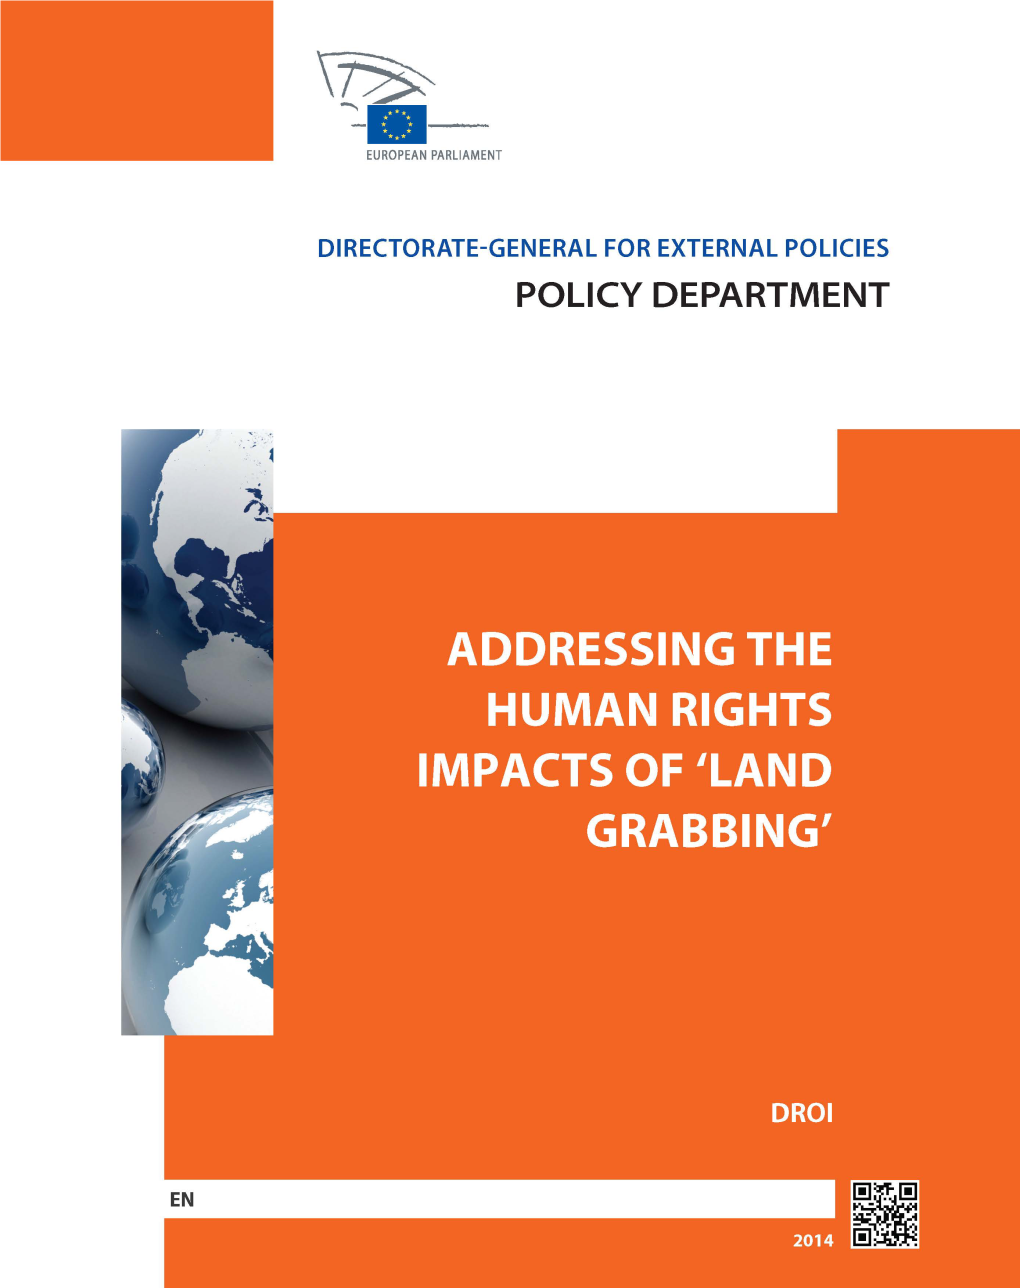 Addressing the Human Rights Impacts of 'Land Grabbing'